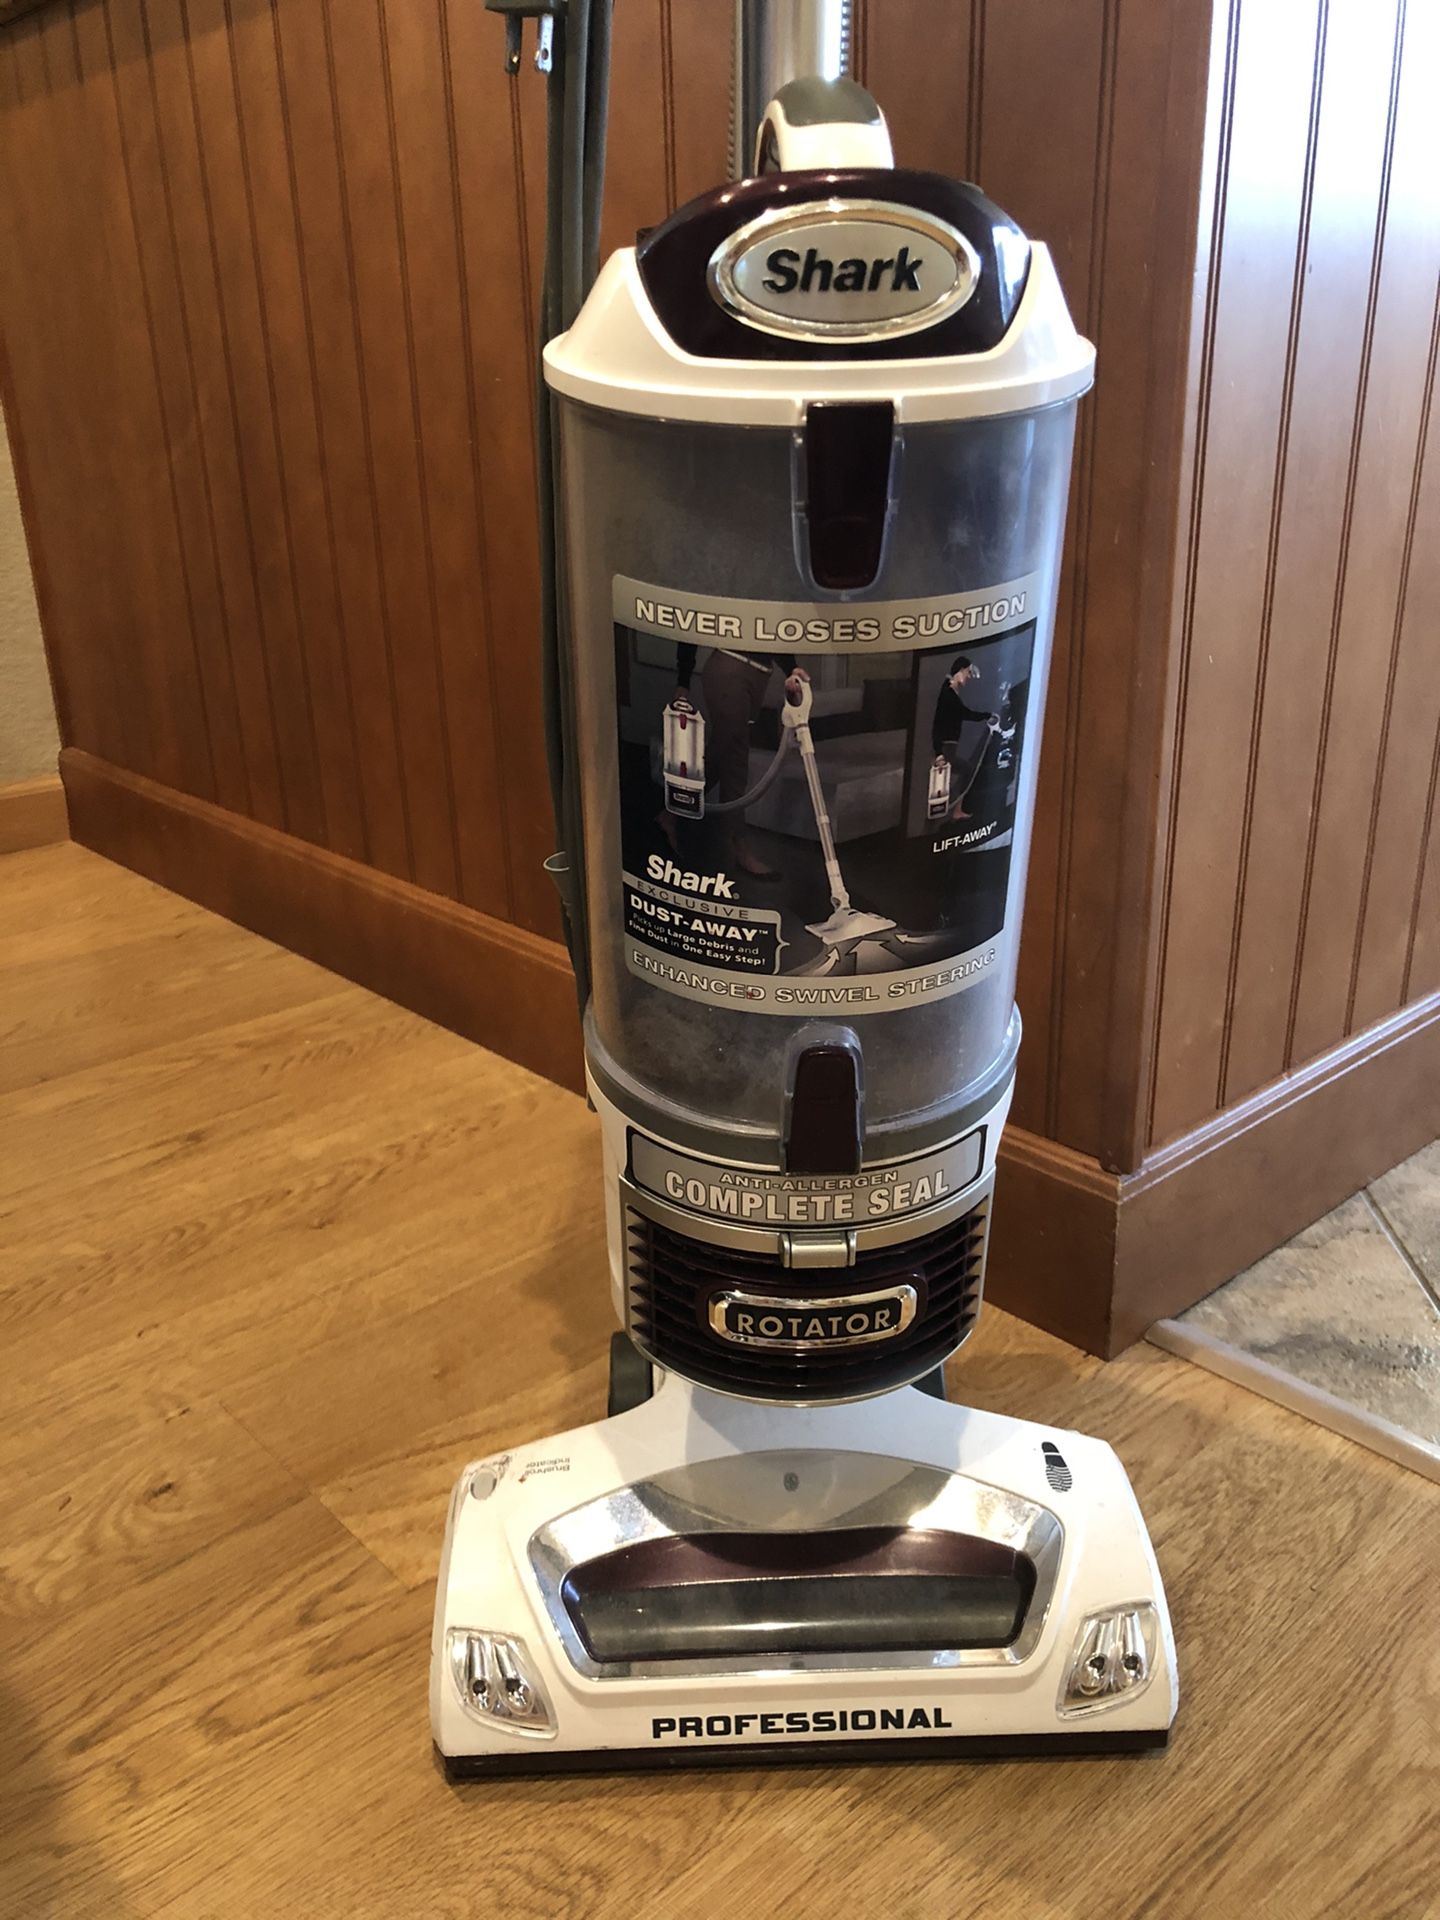 Shark Dust-Away Vacuum Cleaner! Great Condition! Must Sell!